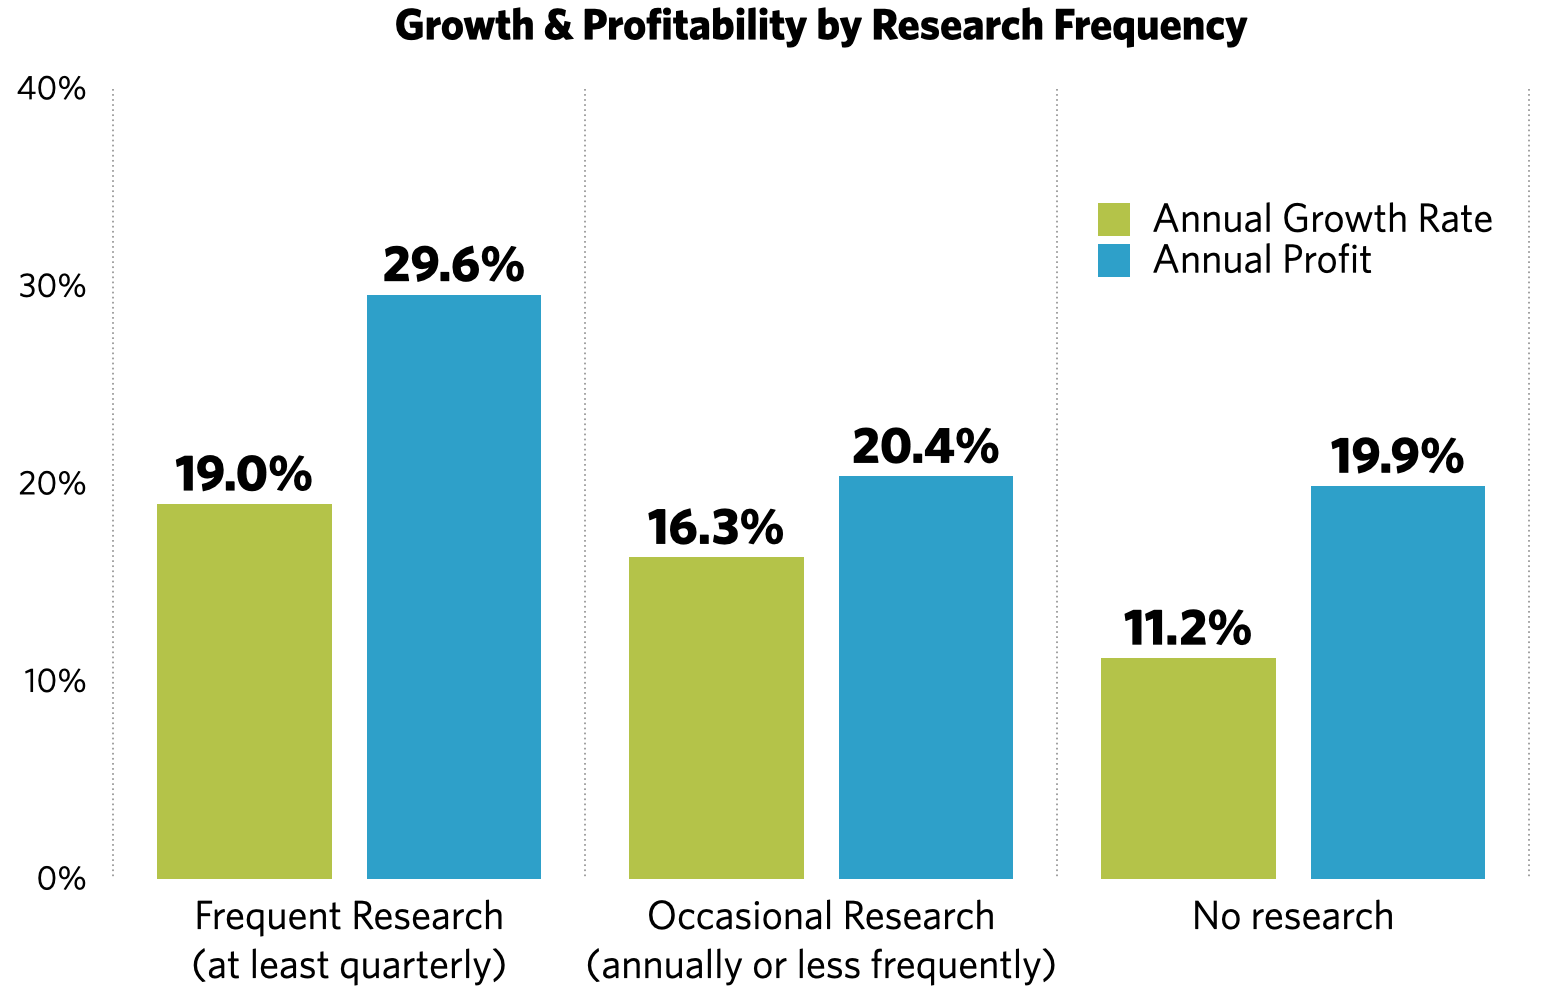 Growth & profitability by research frequency chart/example. Firms that conduct frequent research produce 29.6% more profit and are growing at a rate of 19%. Whereas occasional or no research shows an 11.2% growth rate and a 19.9% annual profit.